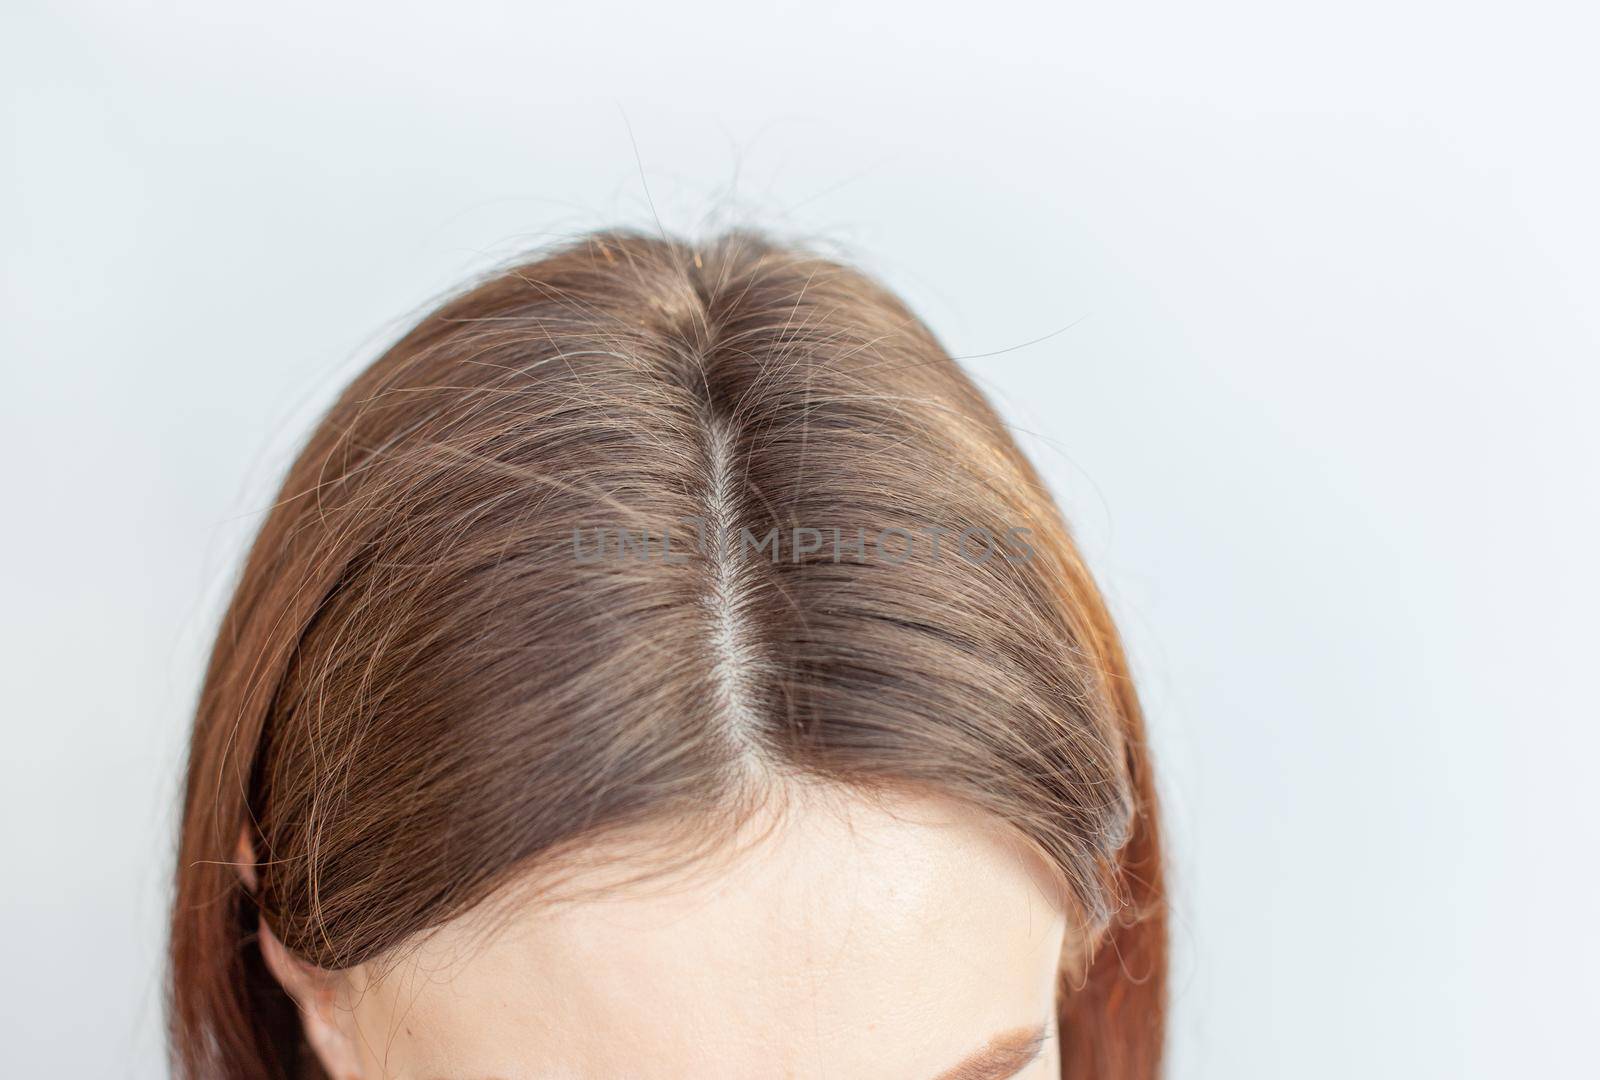 A woman's head with a parting of gray hair that has grown roots due to quarantine. Brown hair on a woman's head close-up.